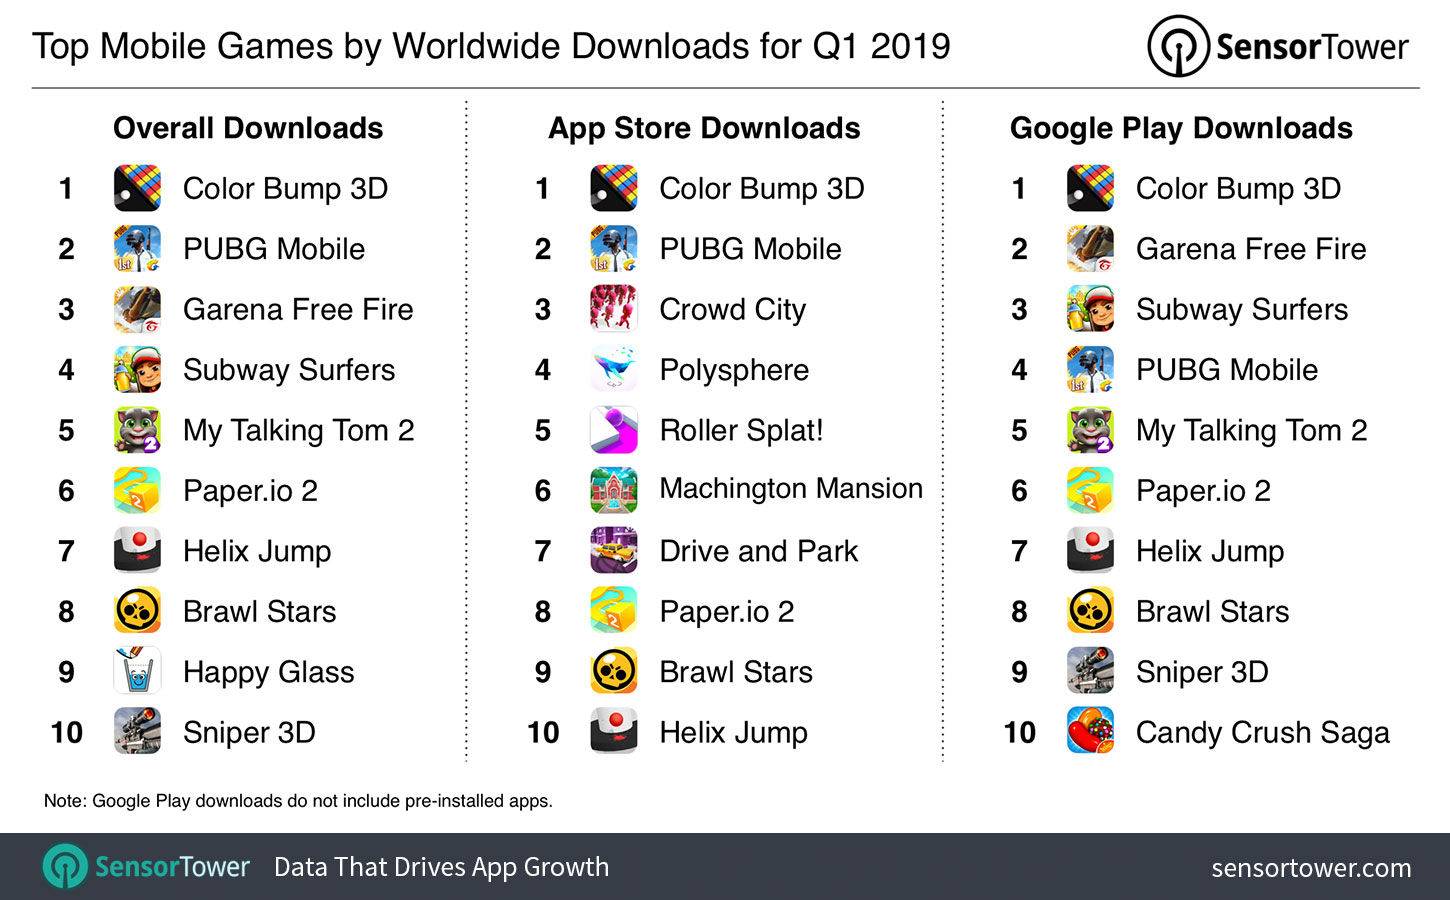 Chart showing the world's most downloaded iOS and Google Play games for Q1 2019